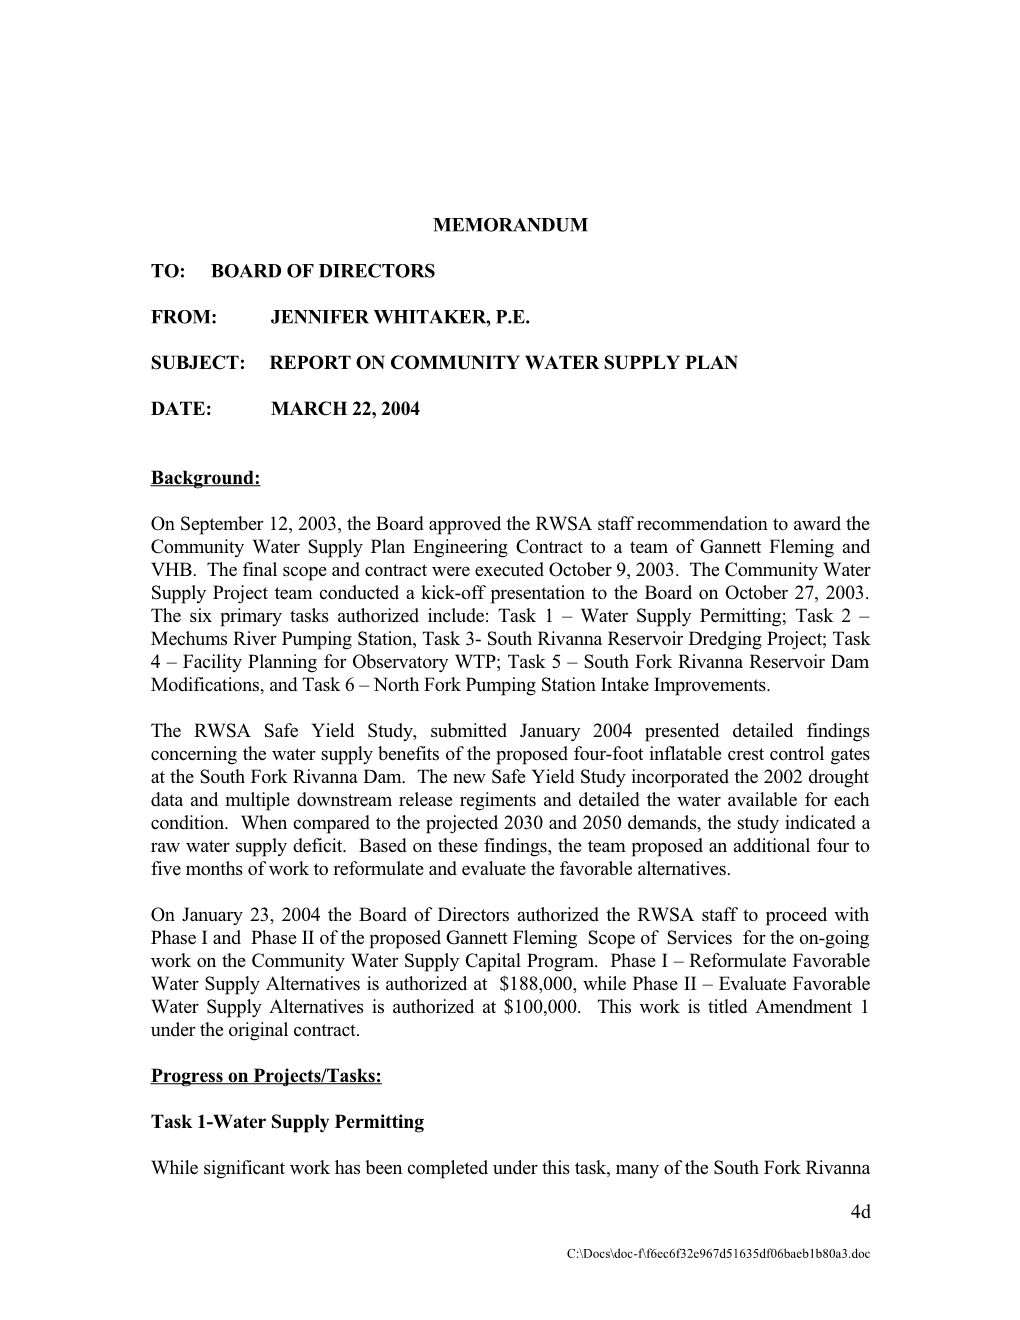 Subject: Report on Community Water Supply Plan